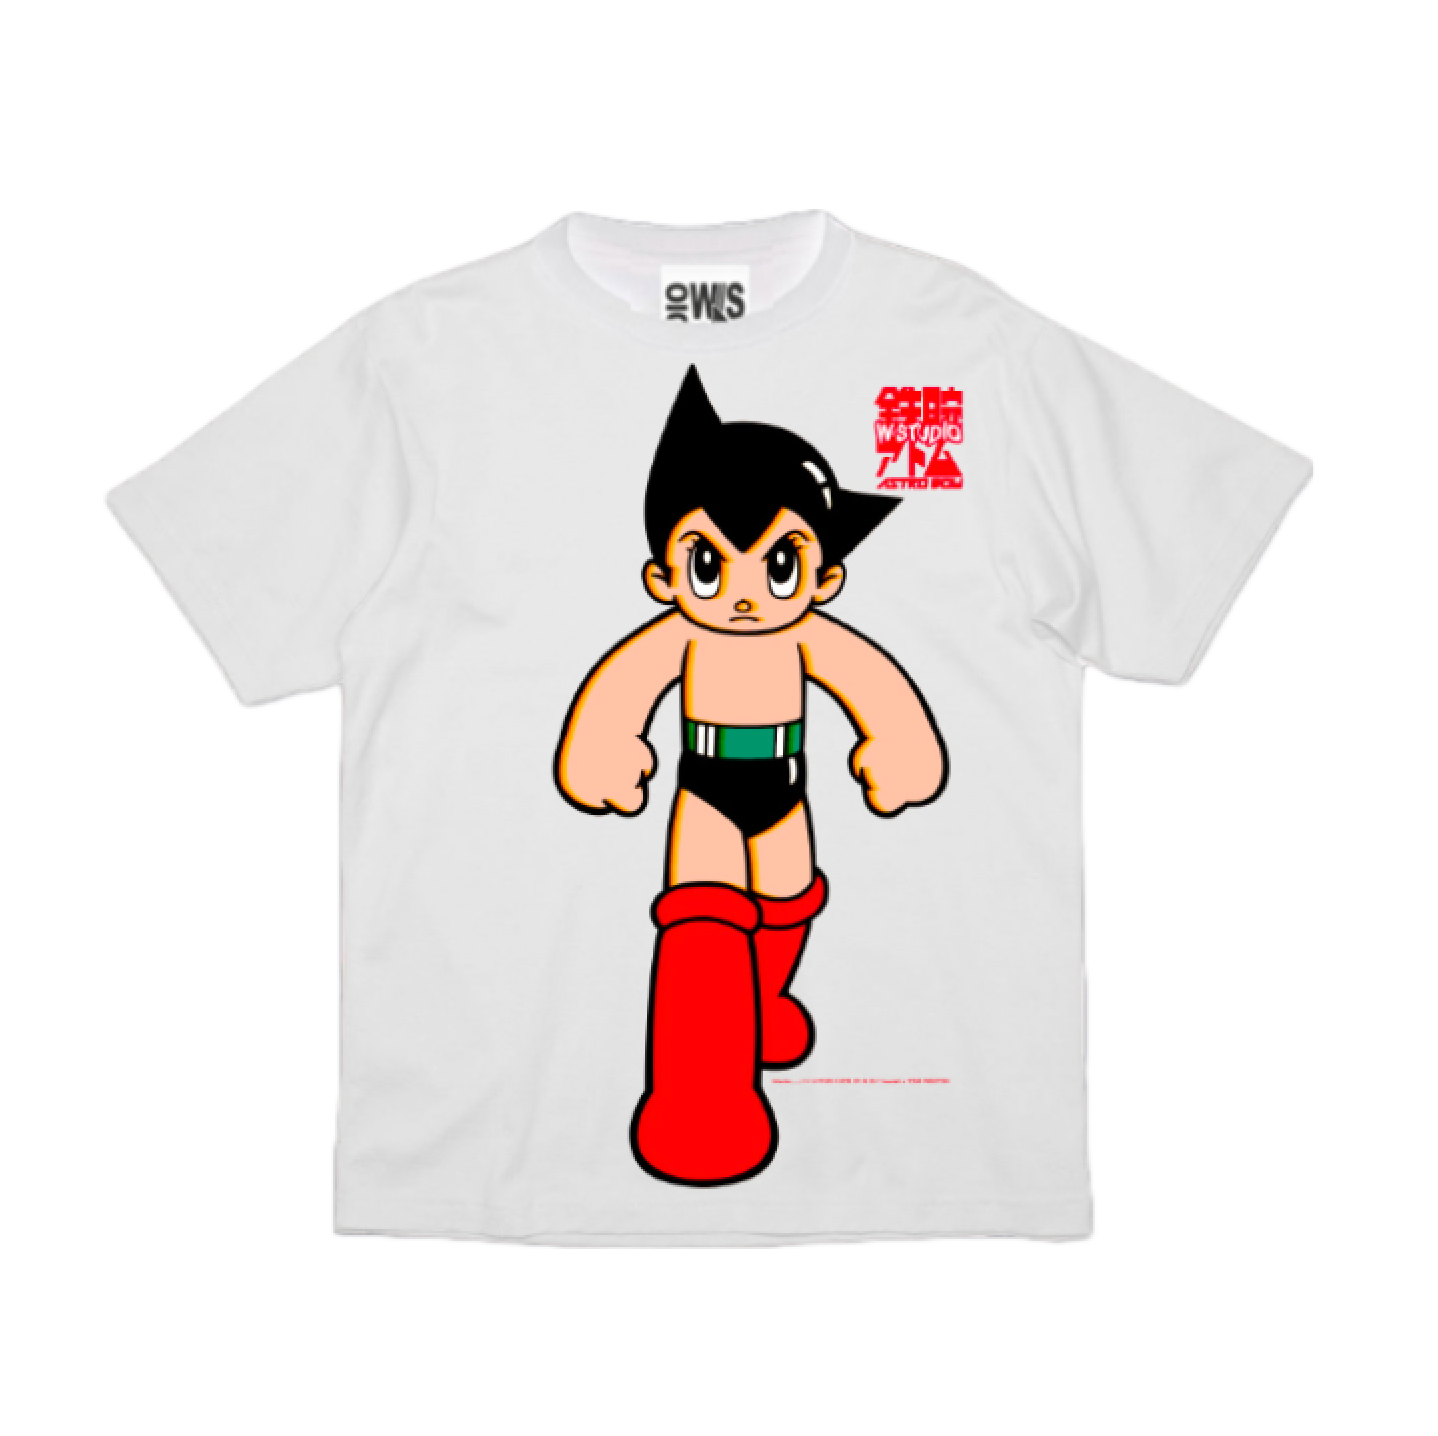 Astro Boy Pose Tshirt – All The Right